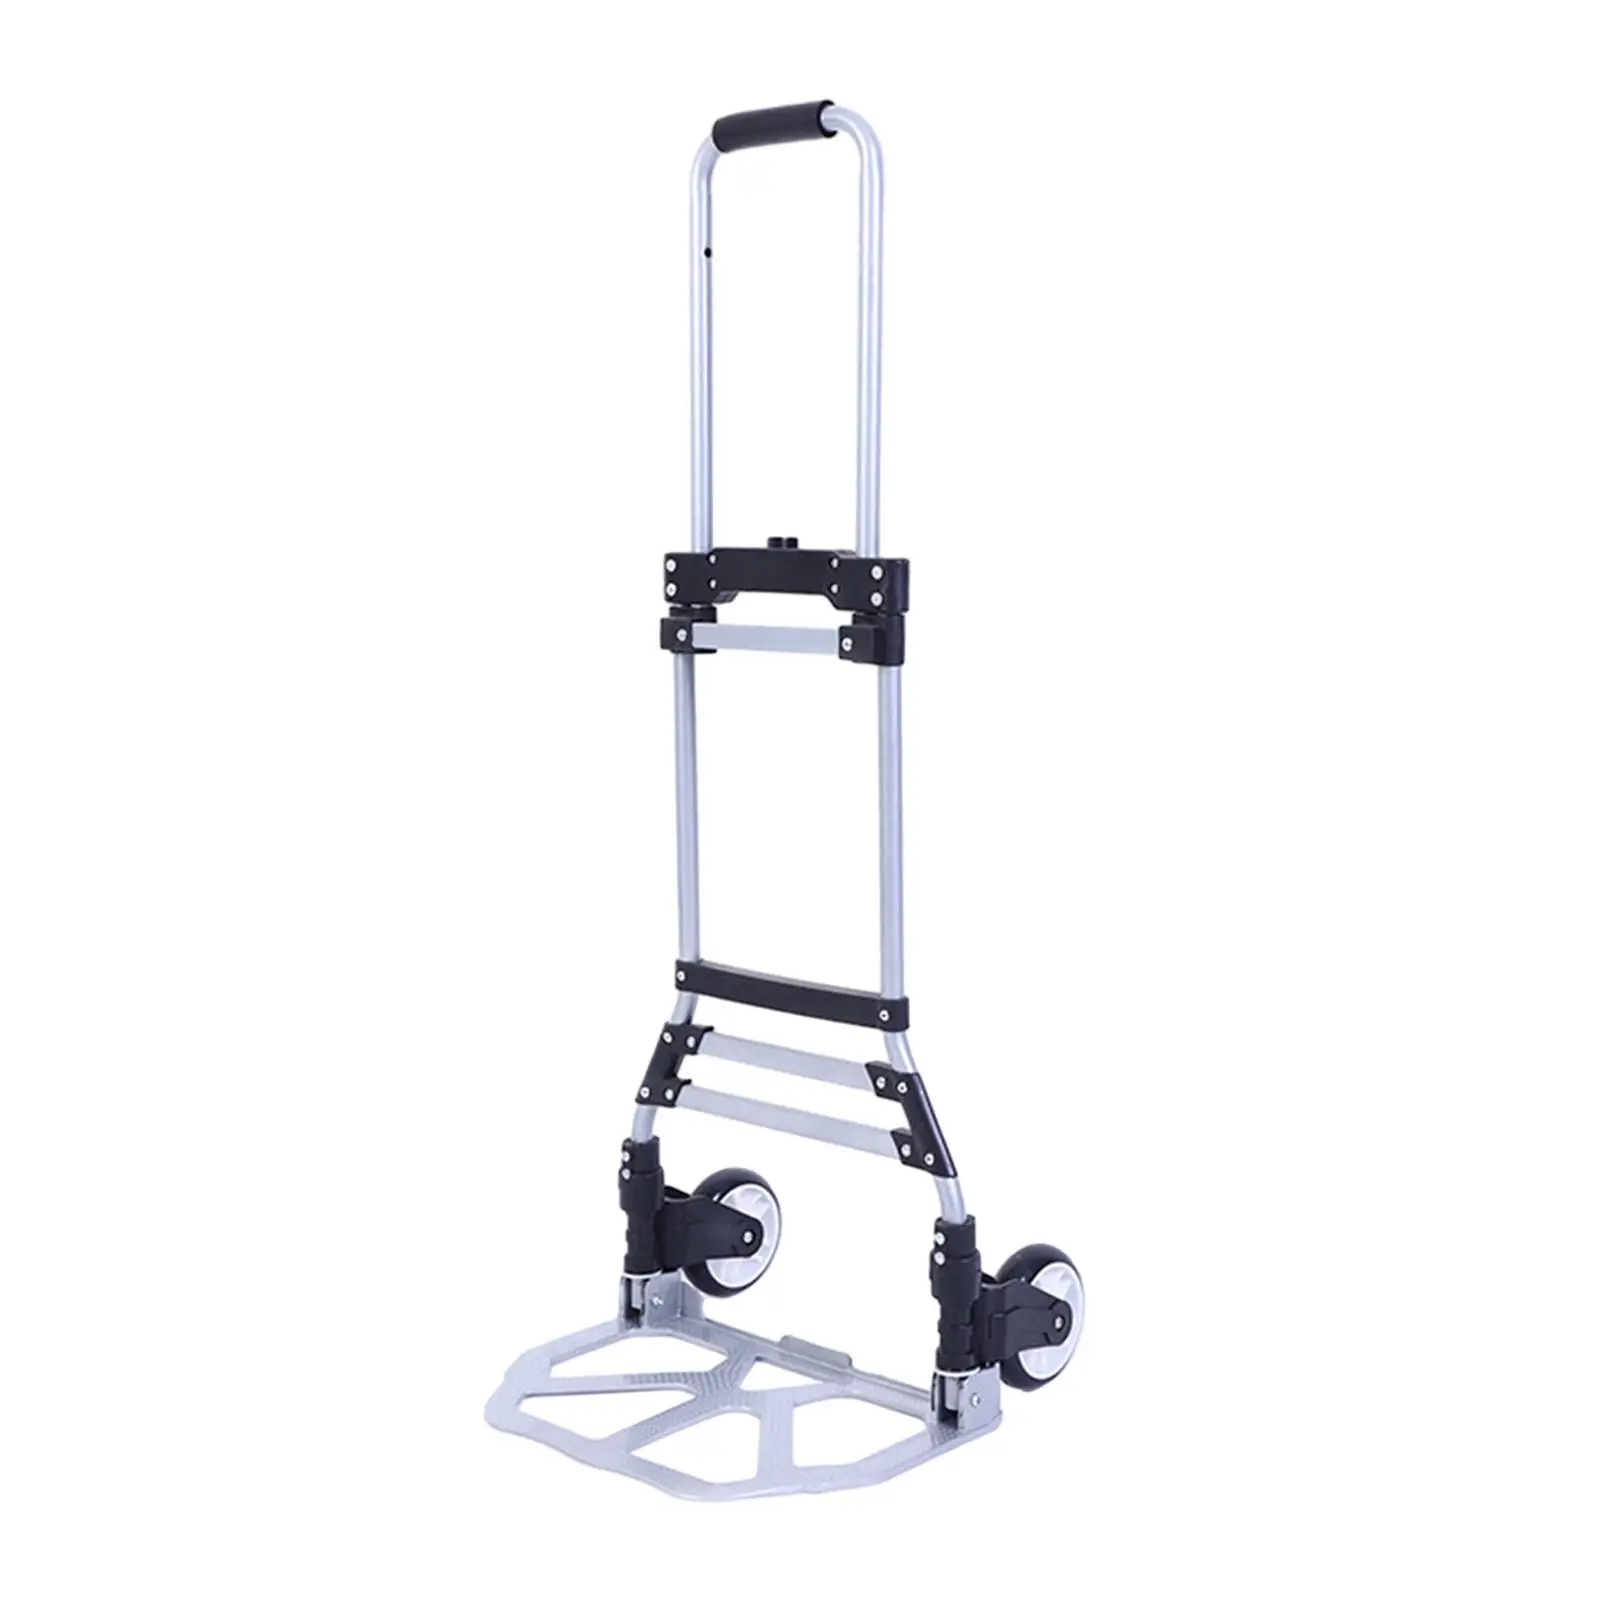 Foldable Hand Cart Portable Luggage Cart for Travel Household Transportation